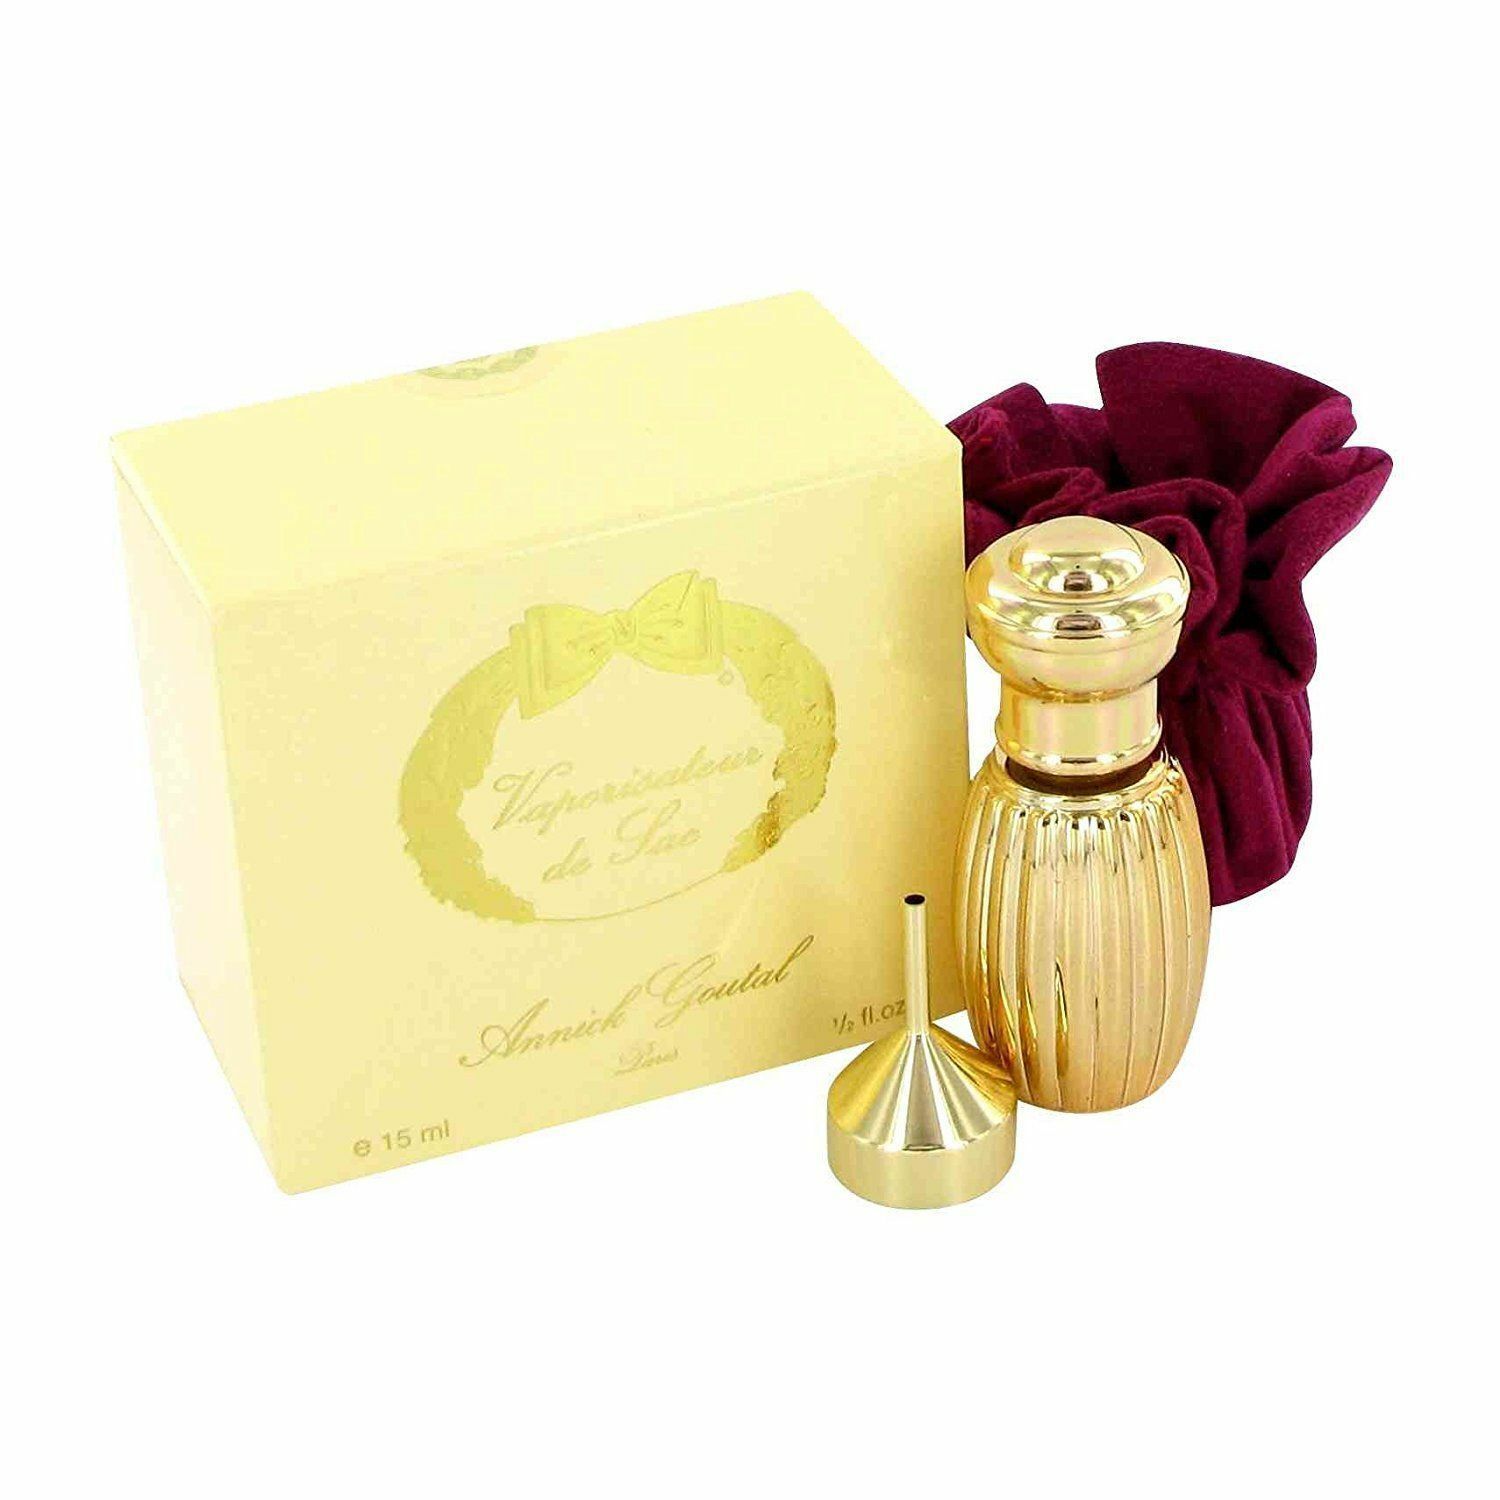 Passion by Annick Goutal for Women 0.5 oz EDP Purse Spray Refillable Gold Case